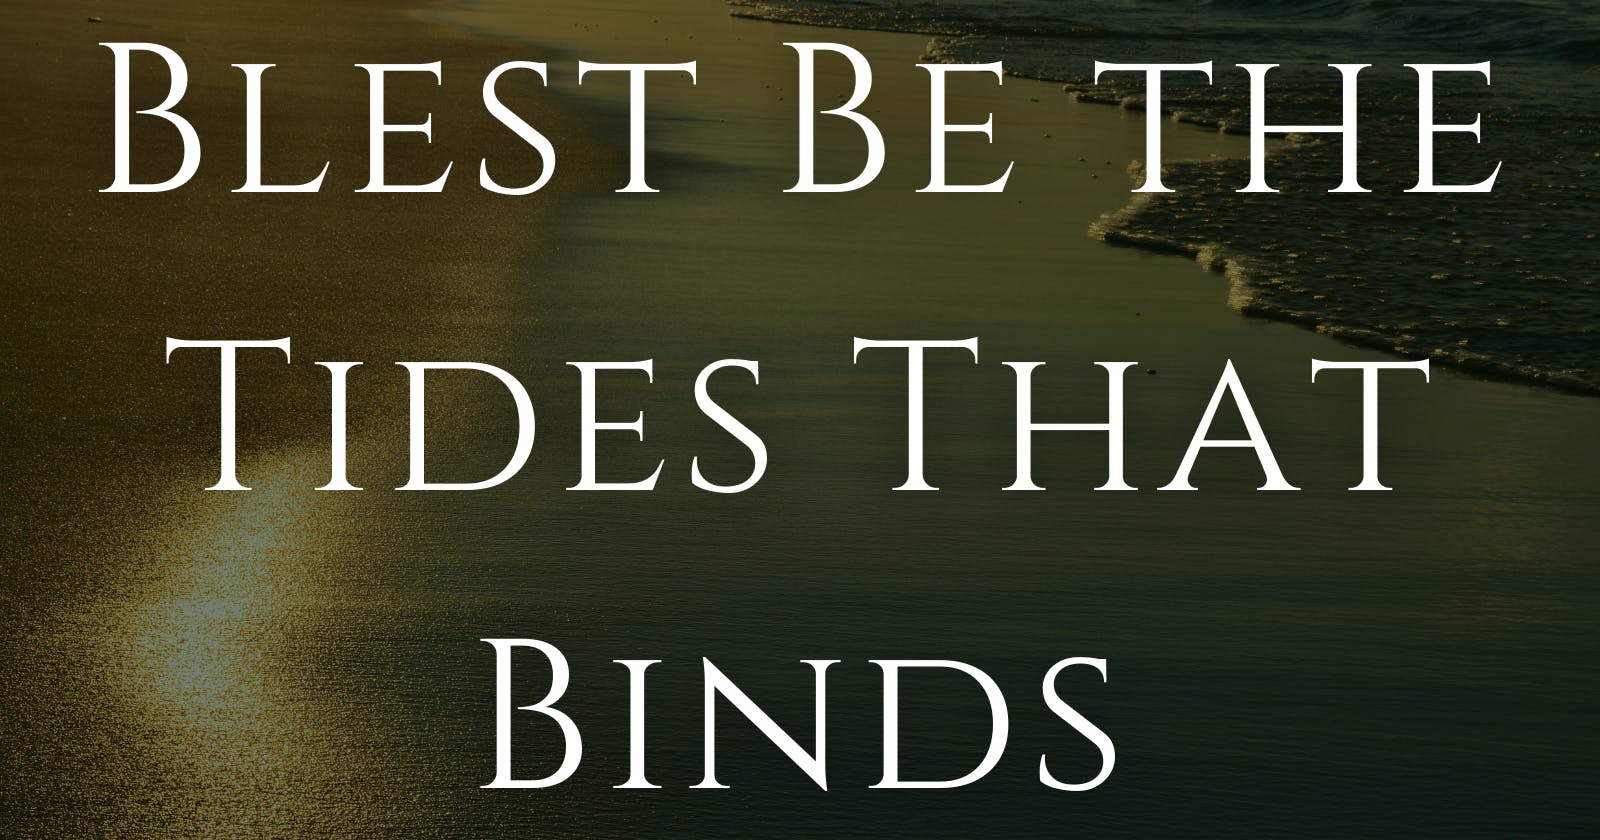 Blest Be the Tides That Binds